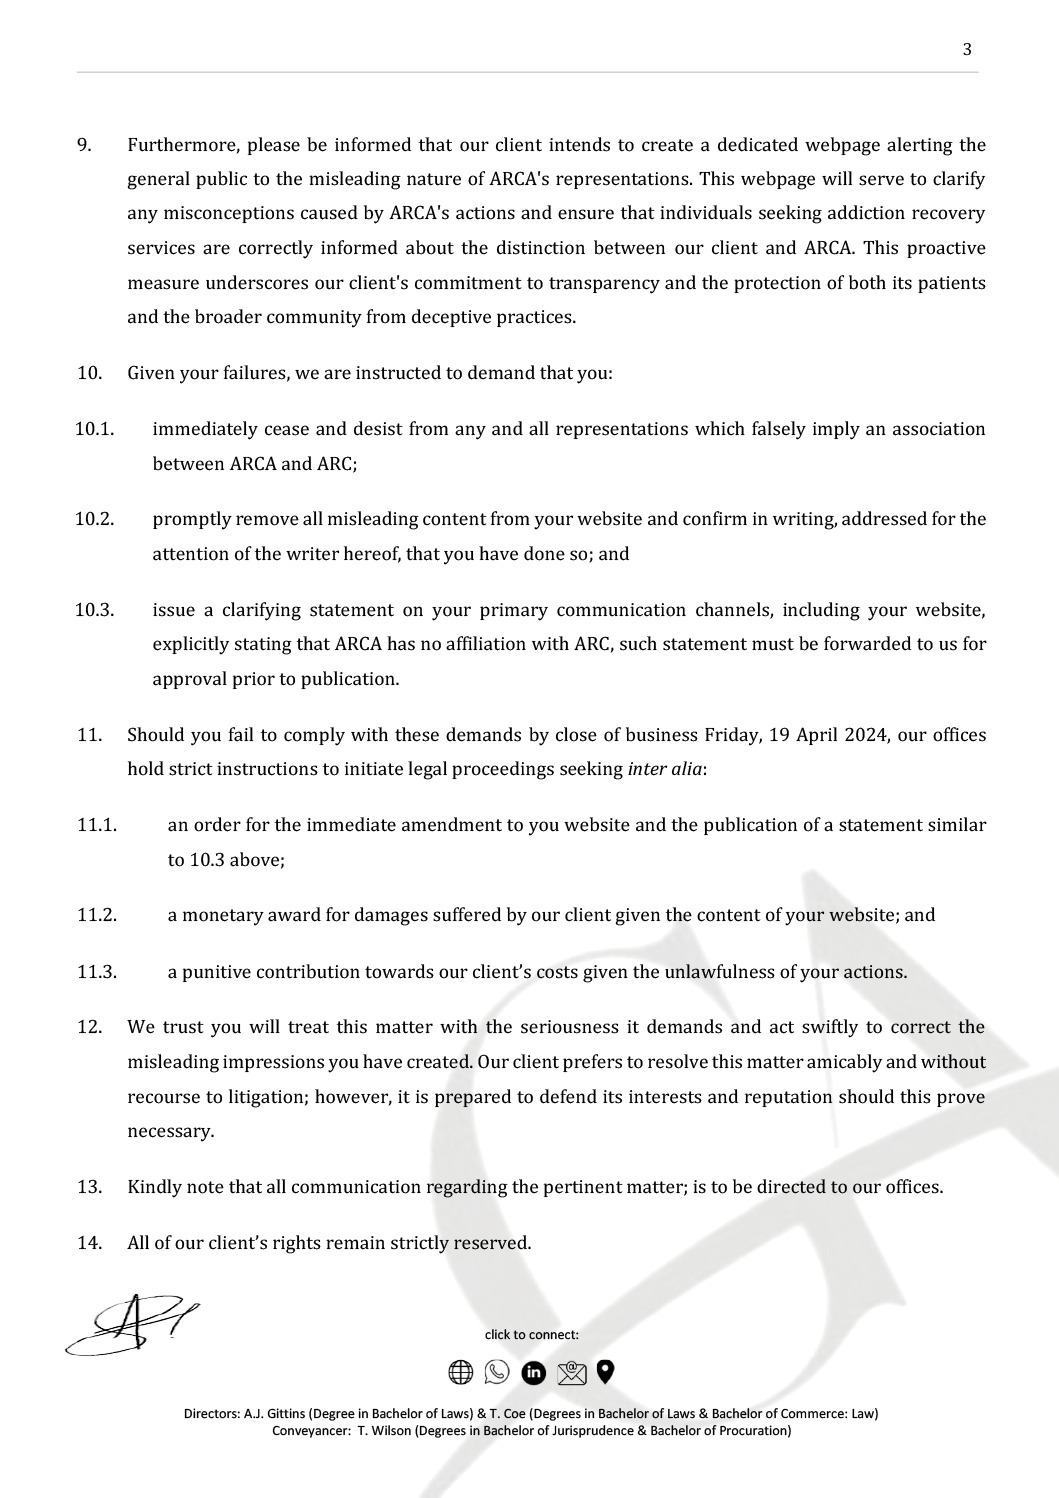 Legal notice highlighting misconduct by ARCA Johannesburg.